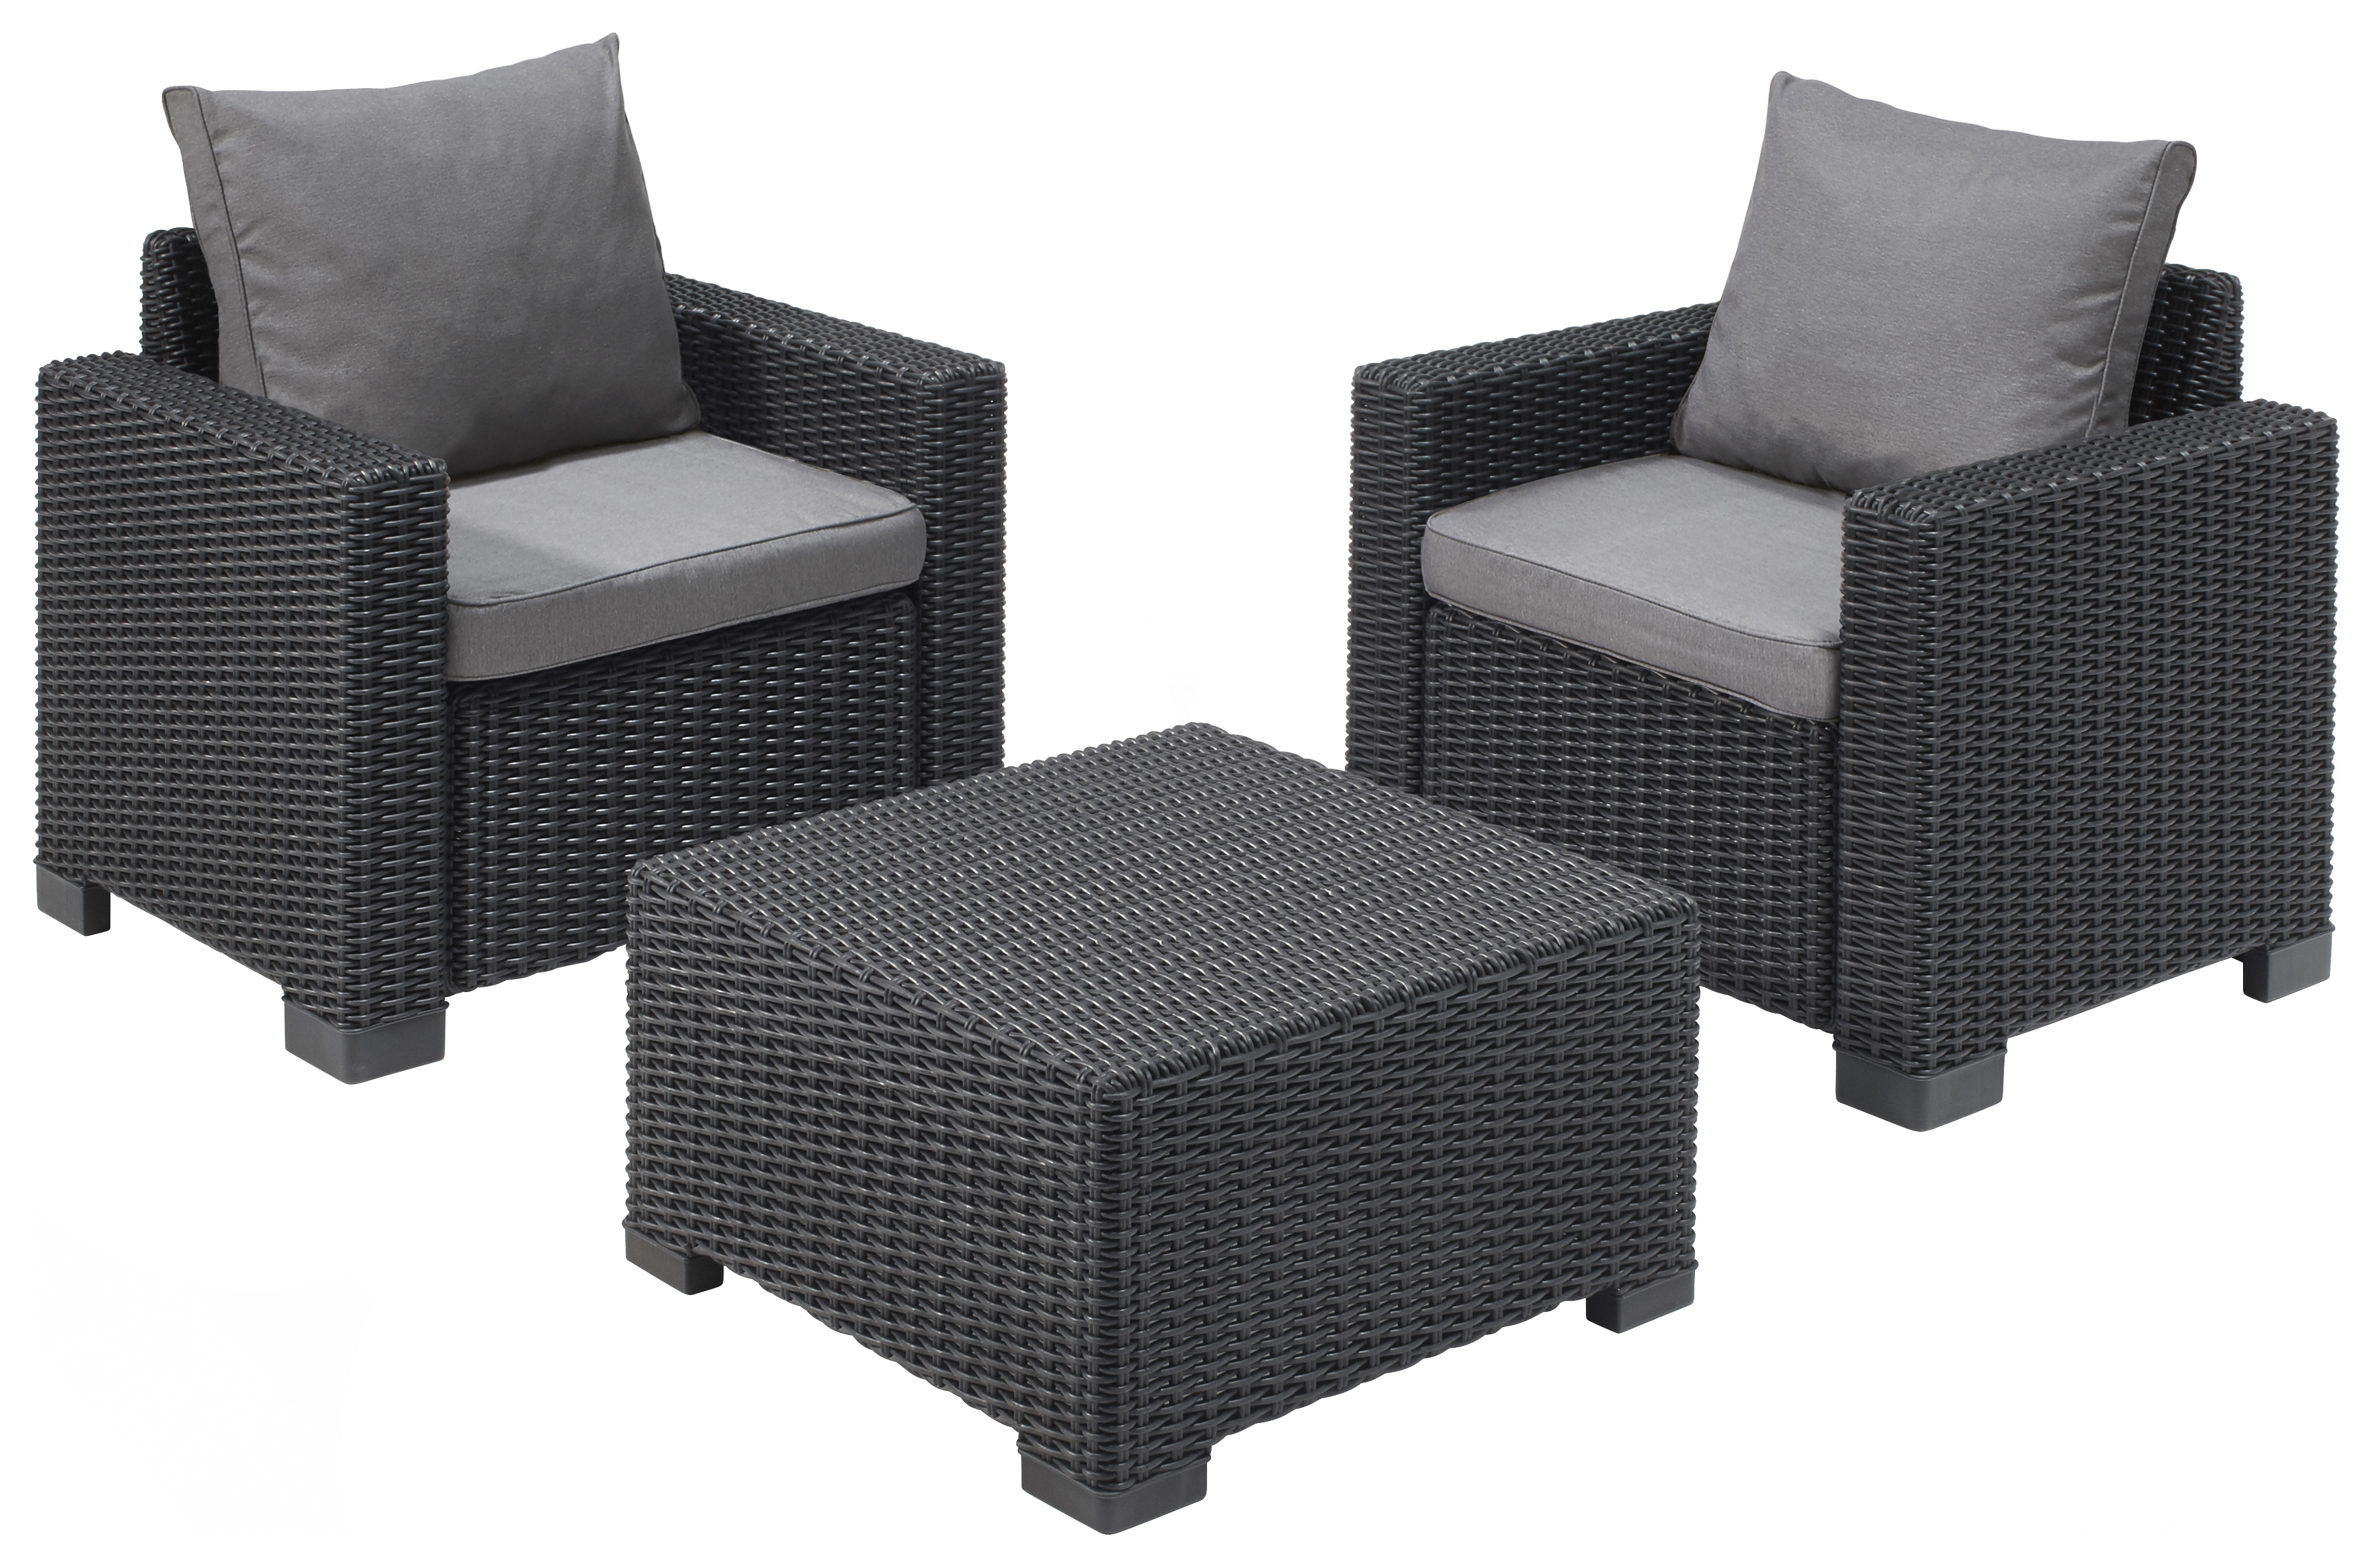 Image of Keter California 2 Seater Outdoor Balcony Garden Furniture Set - Graphite with Grey Cushions